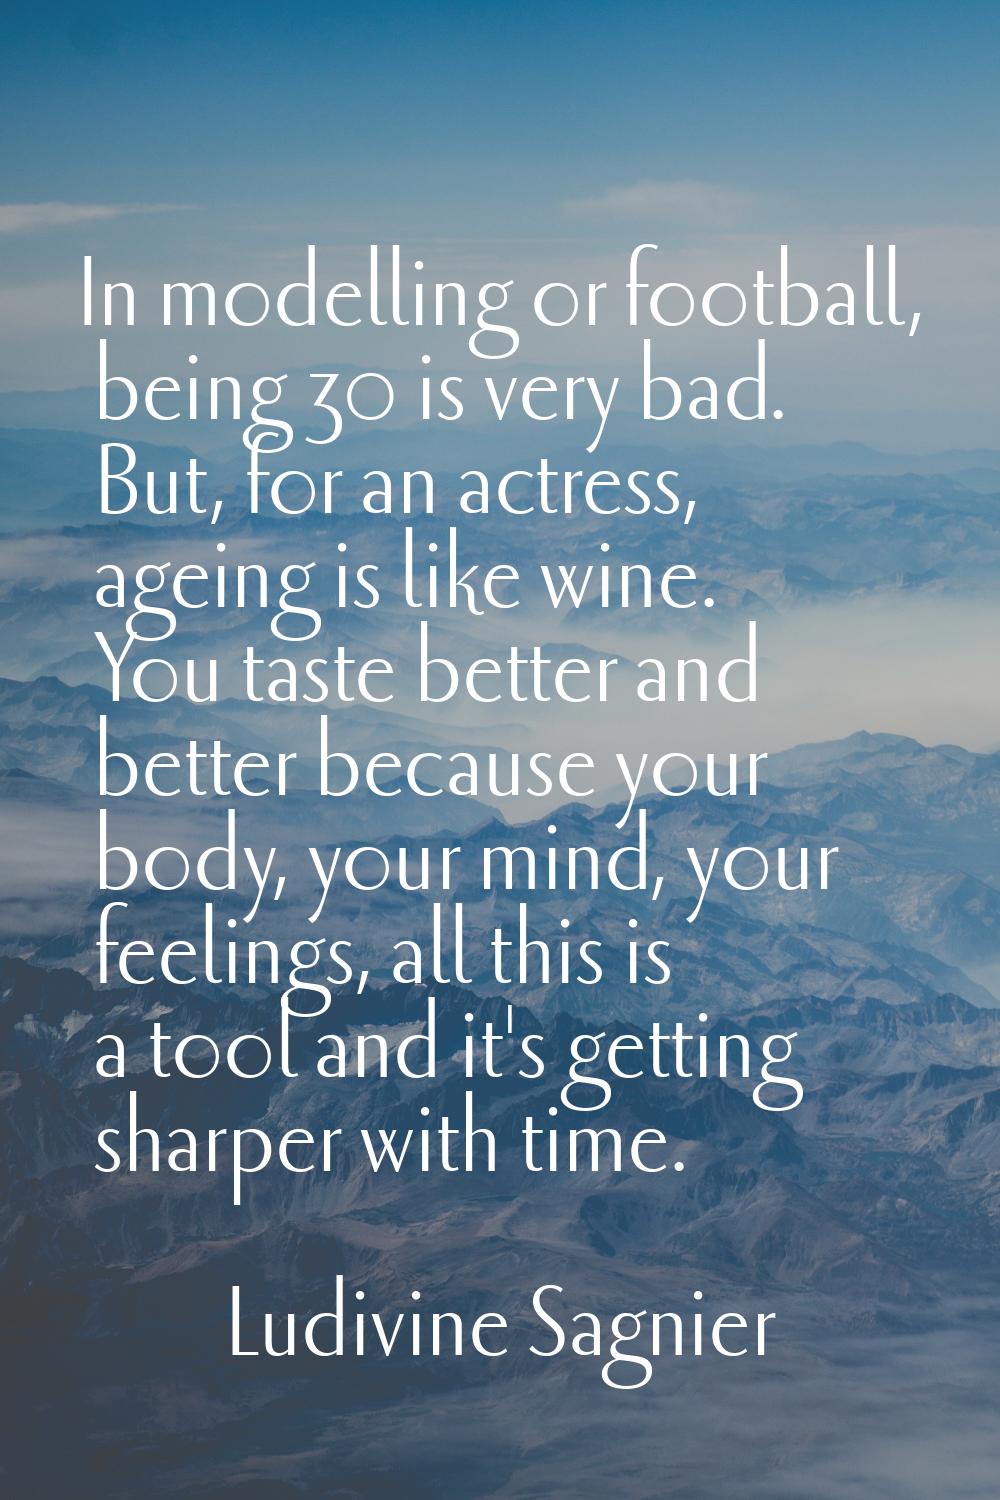 In modelling or football, being 30 is very bad. But, for an actress, ageing is like wine. You taste